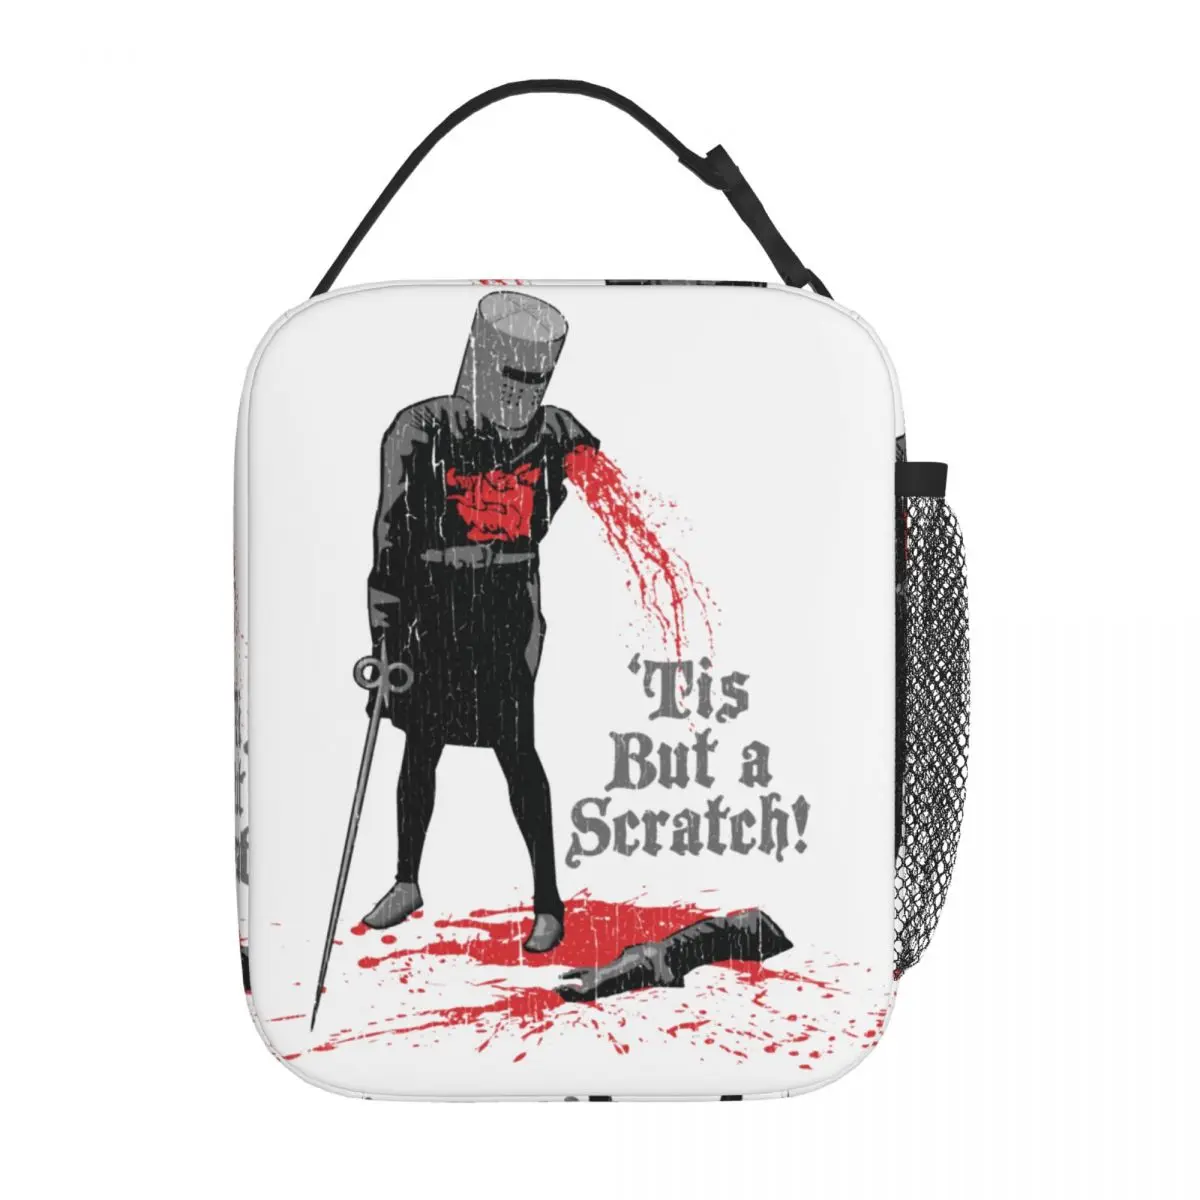 Black Knight Monty Python Tis But A Scratch Accessories Insulated Lunch Bag Storage Food Unique Design Cooler Thermal Bento Box